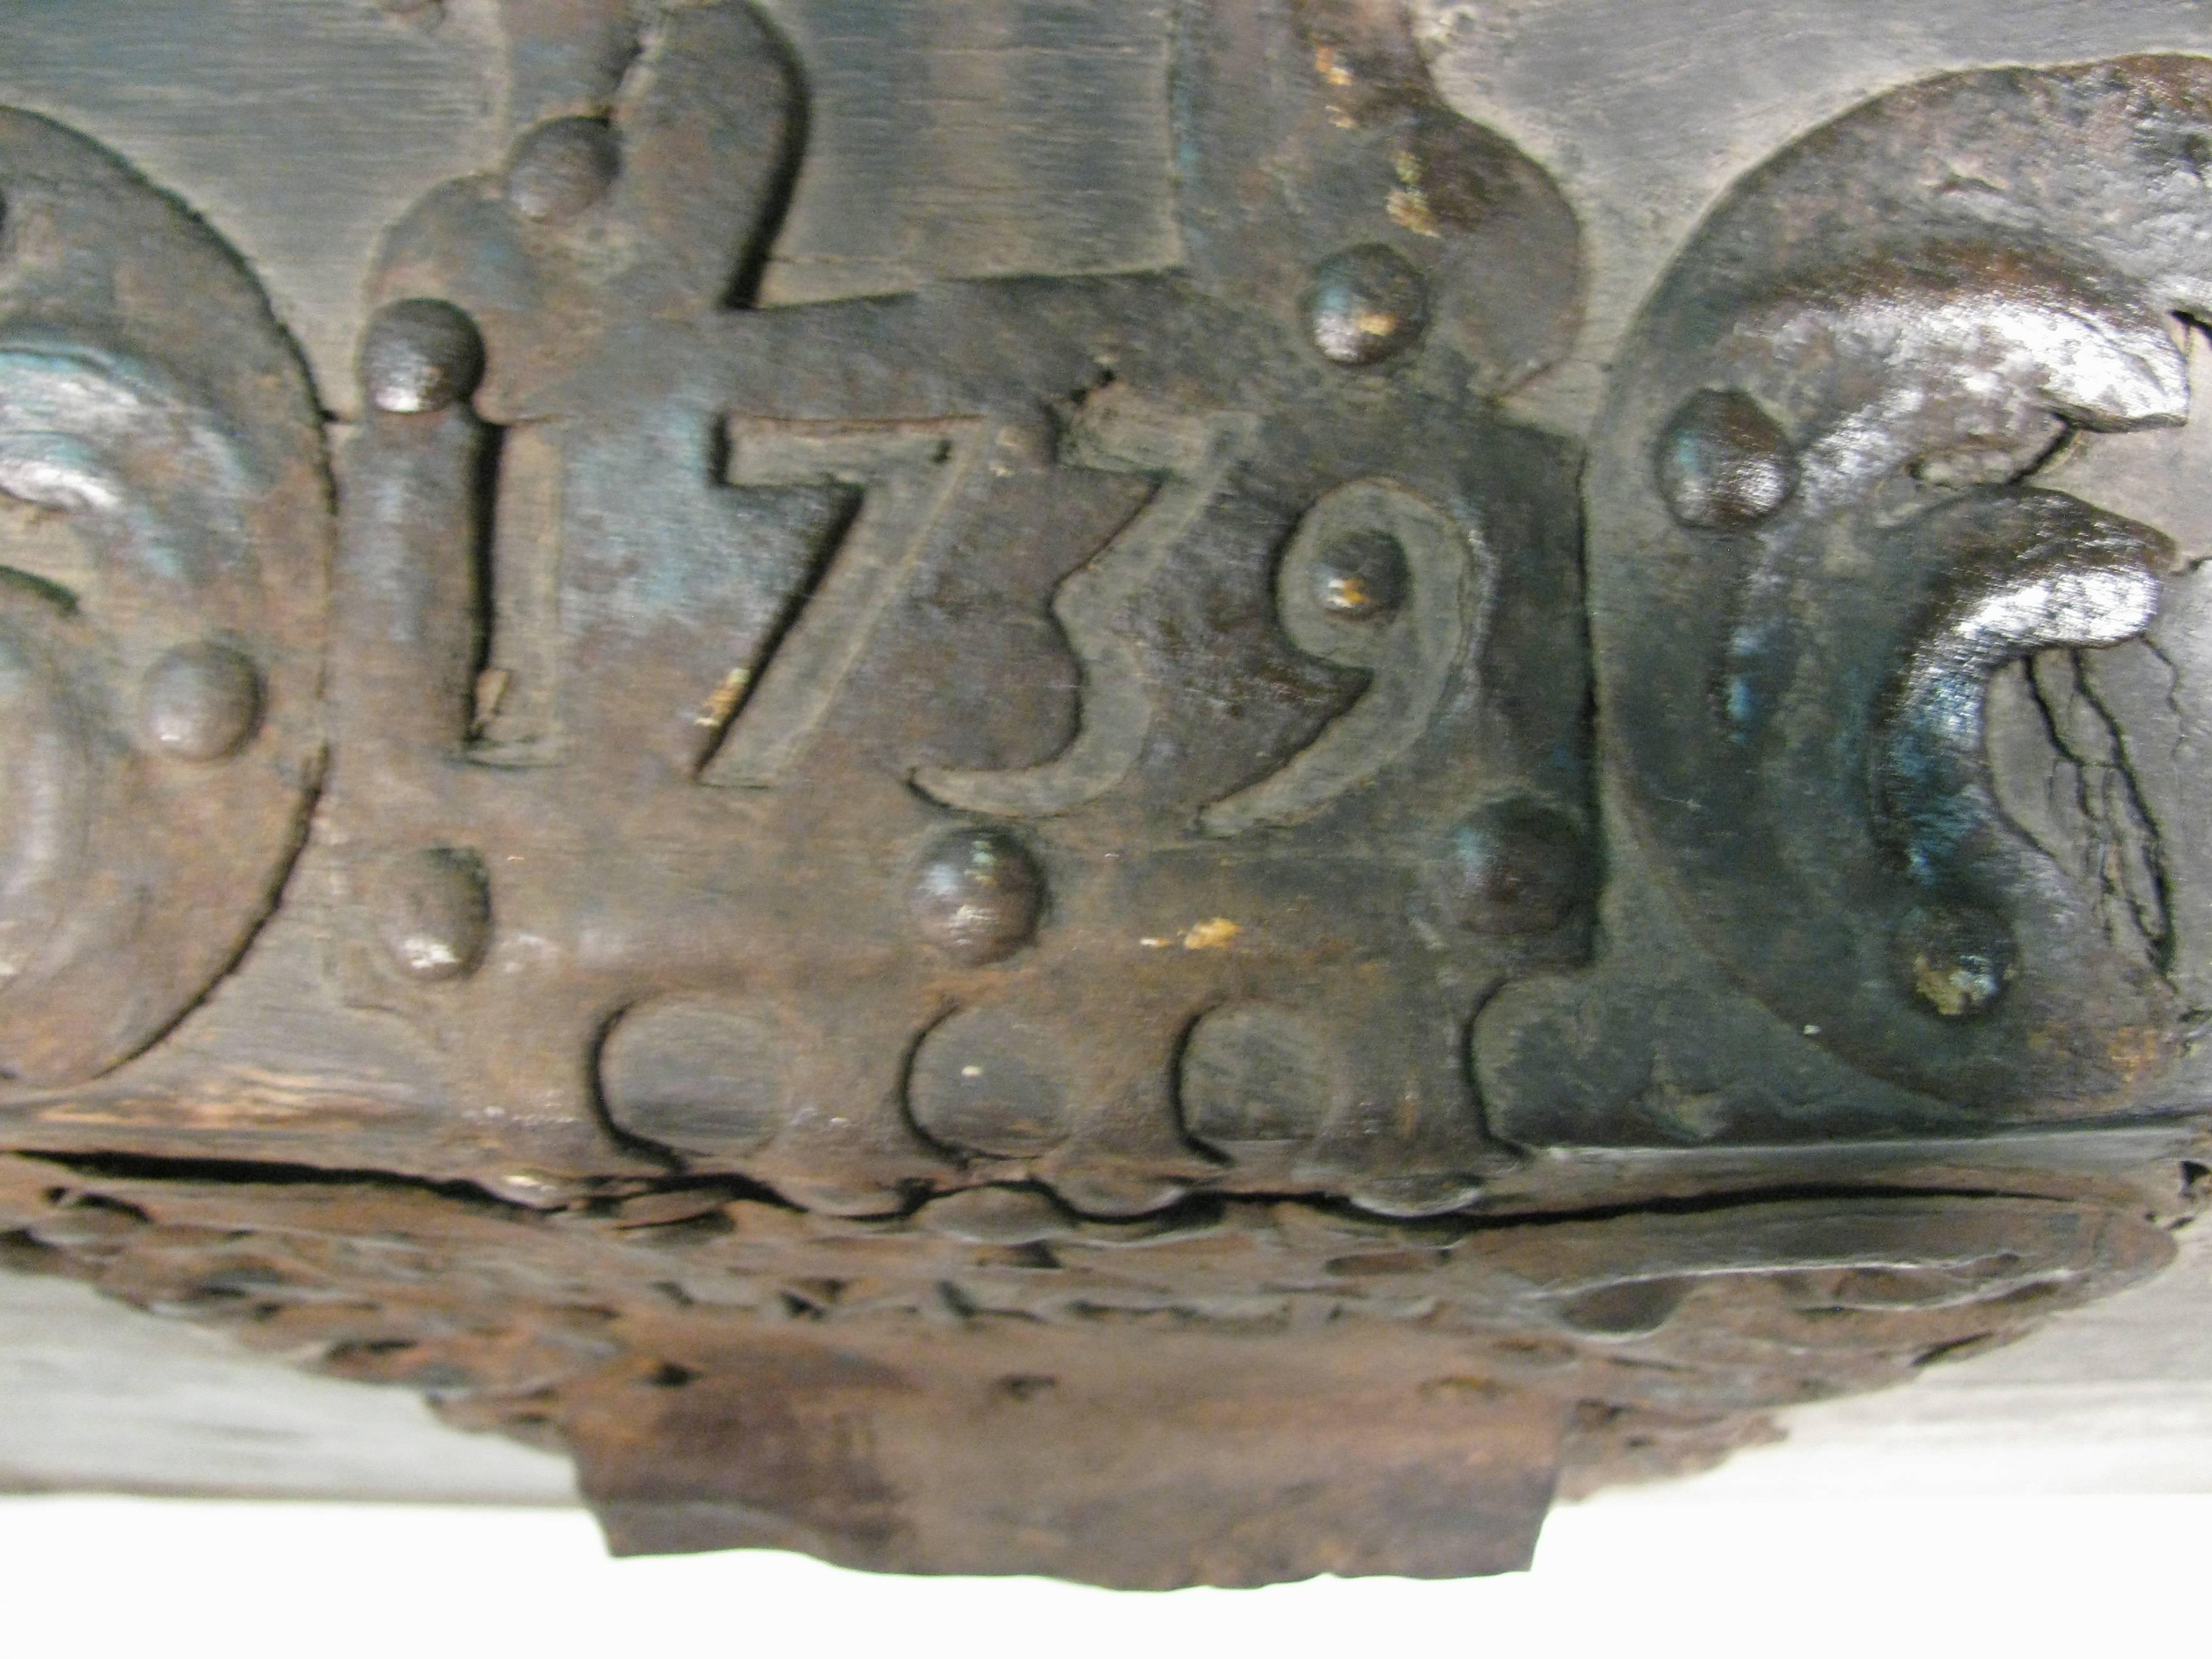 Amazing seafaring trunk, dated 1739. Almost 300 years old and still has retained most of its originality, including the insert shelf. Iron straps and corners both decorate and protect the box. Center of the lid, the date, 1739 is prominently